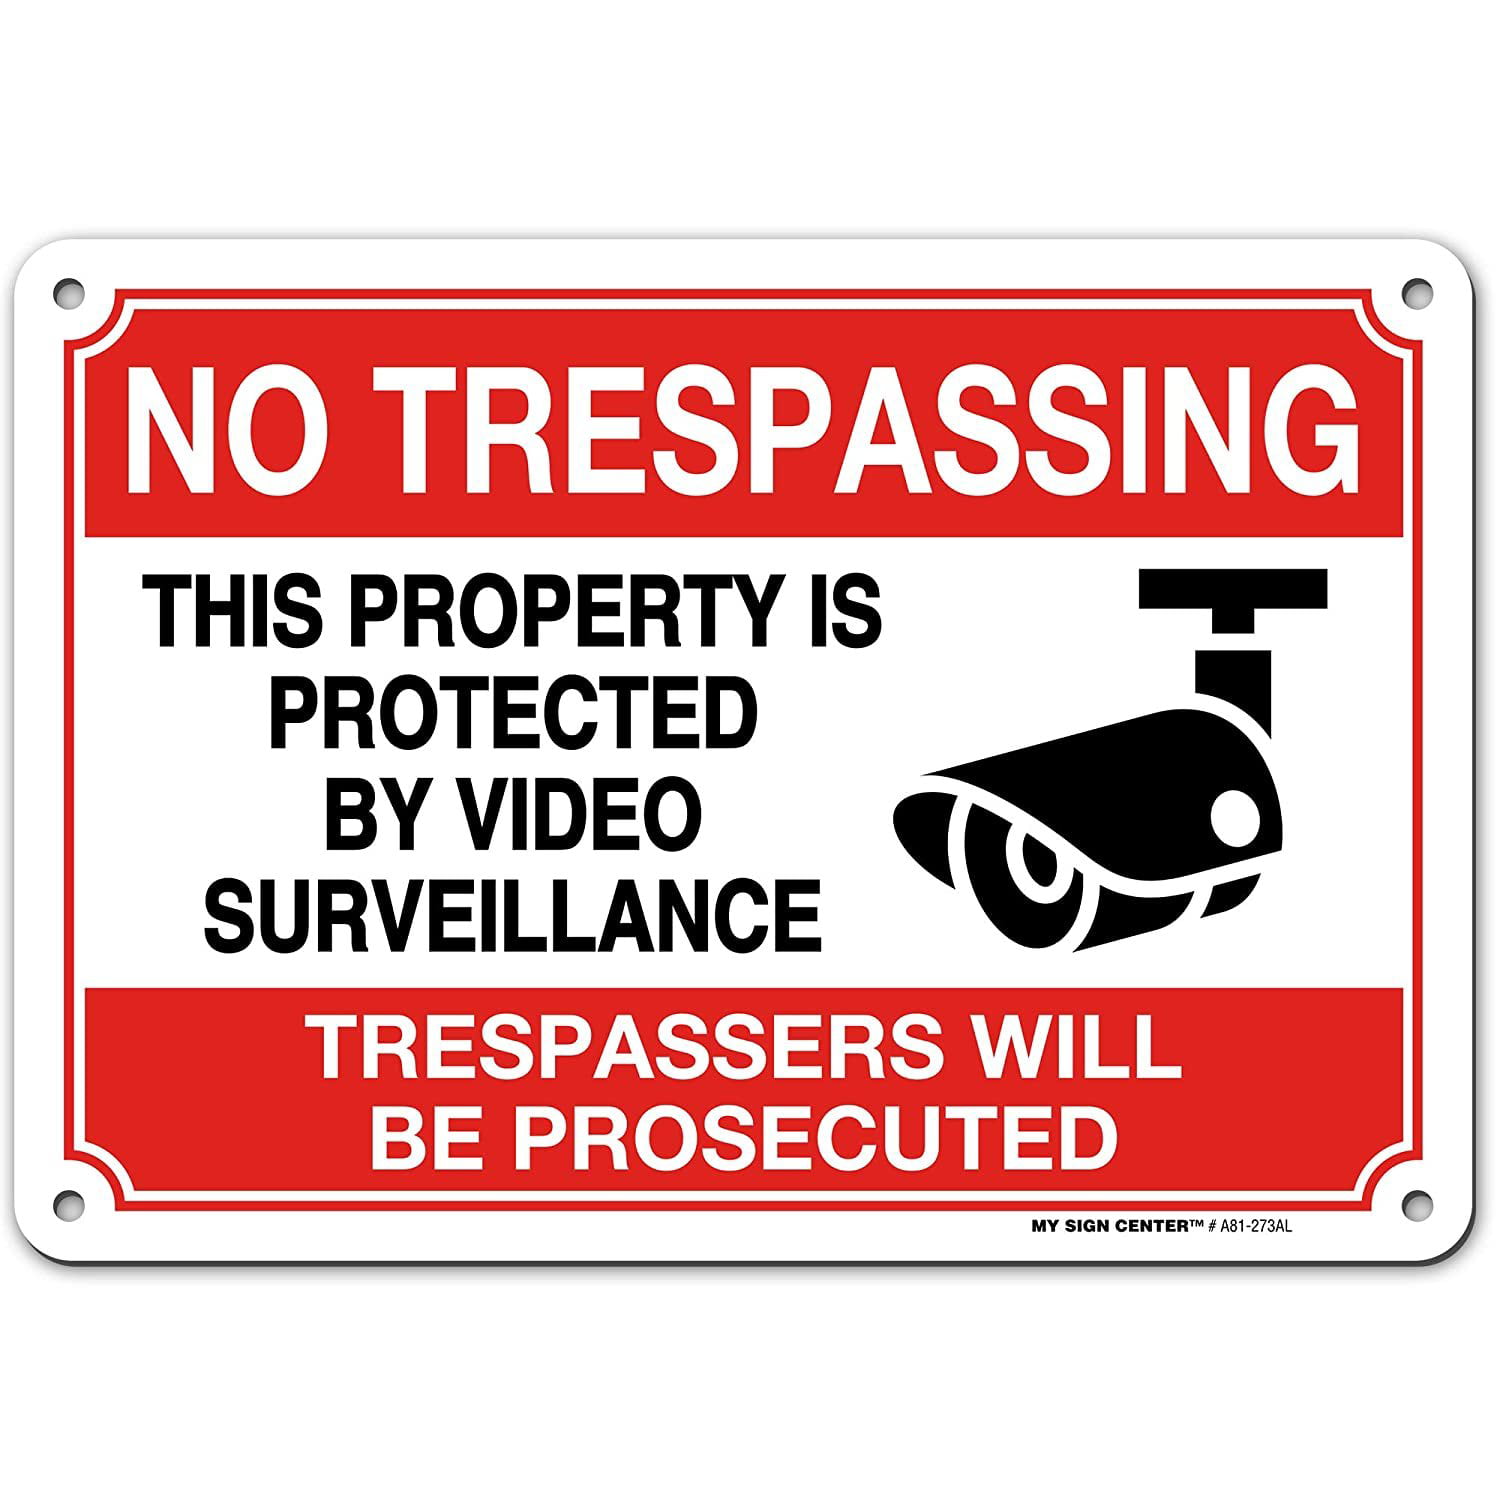 No Trespassing Metal Reflective Warning Sign,UV Protected & Waterproof 10x 7 0.40 Aluminum Indoor Or Outdoor Use for Home Business CCTV Security Camera HISVISION Video Surveillance Sign 2-Pack